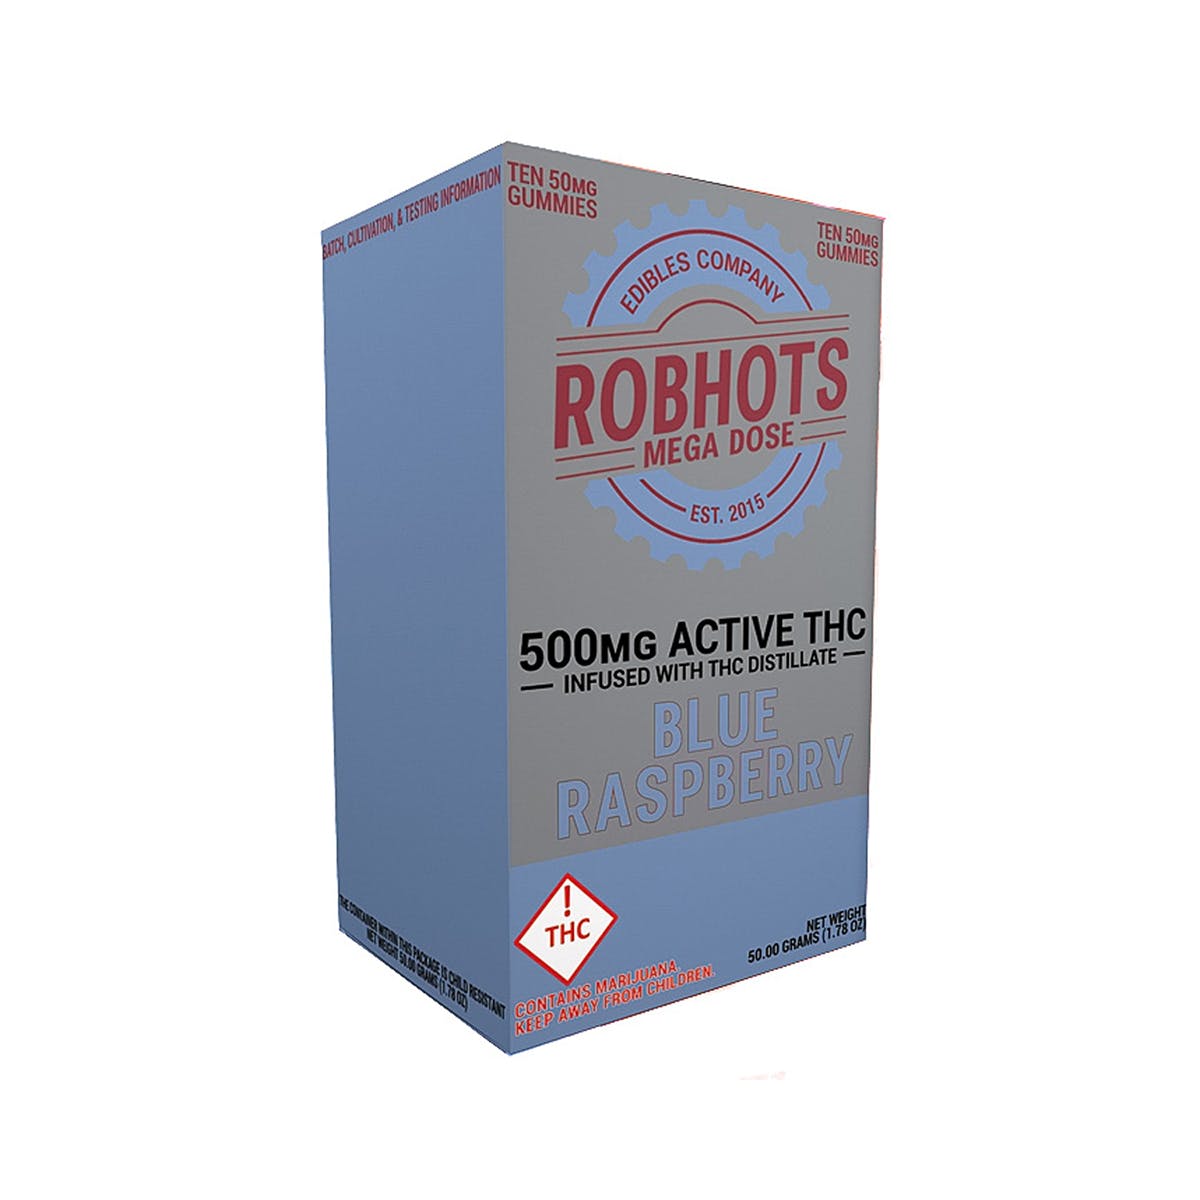 marijuana-dispensaries-the-chronic-boutique-in-colorado-springs-blue-raspberry-500mg-robhots-gummy-multipack